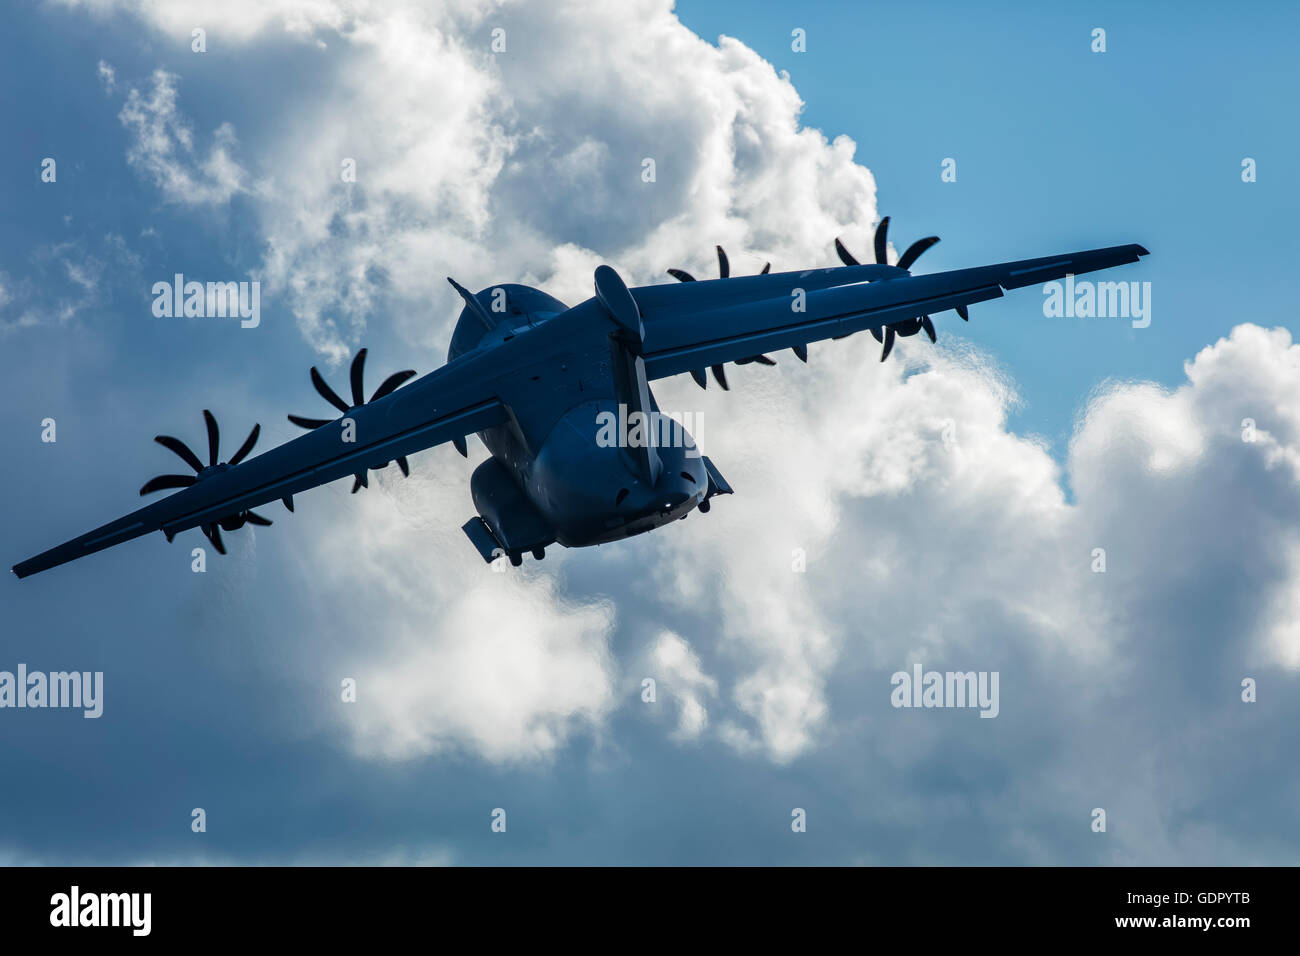 A400M plane taking off and heading towards the sun. Contrejour image against dramatic cloud. Stock Photo